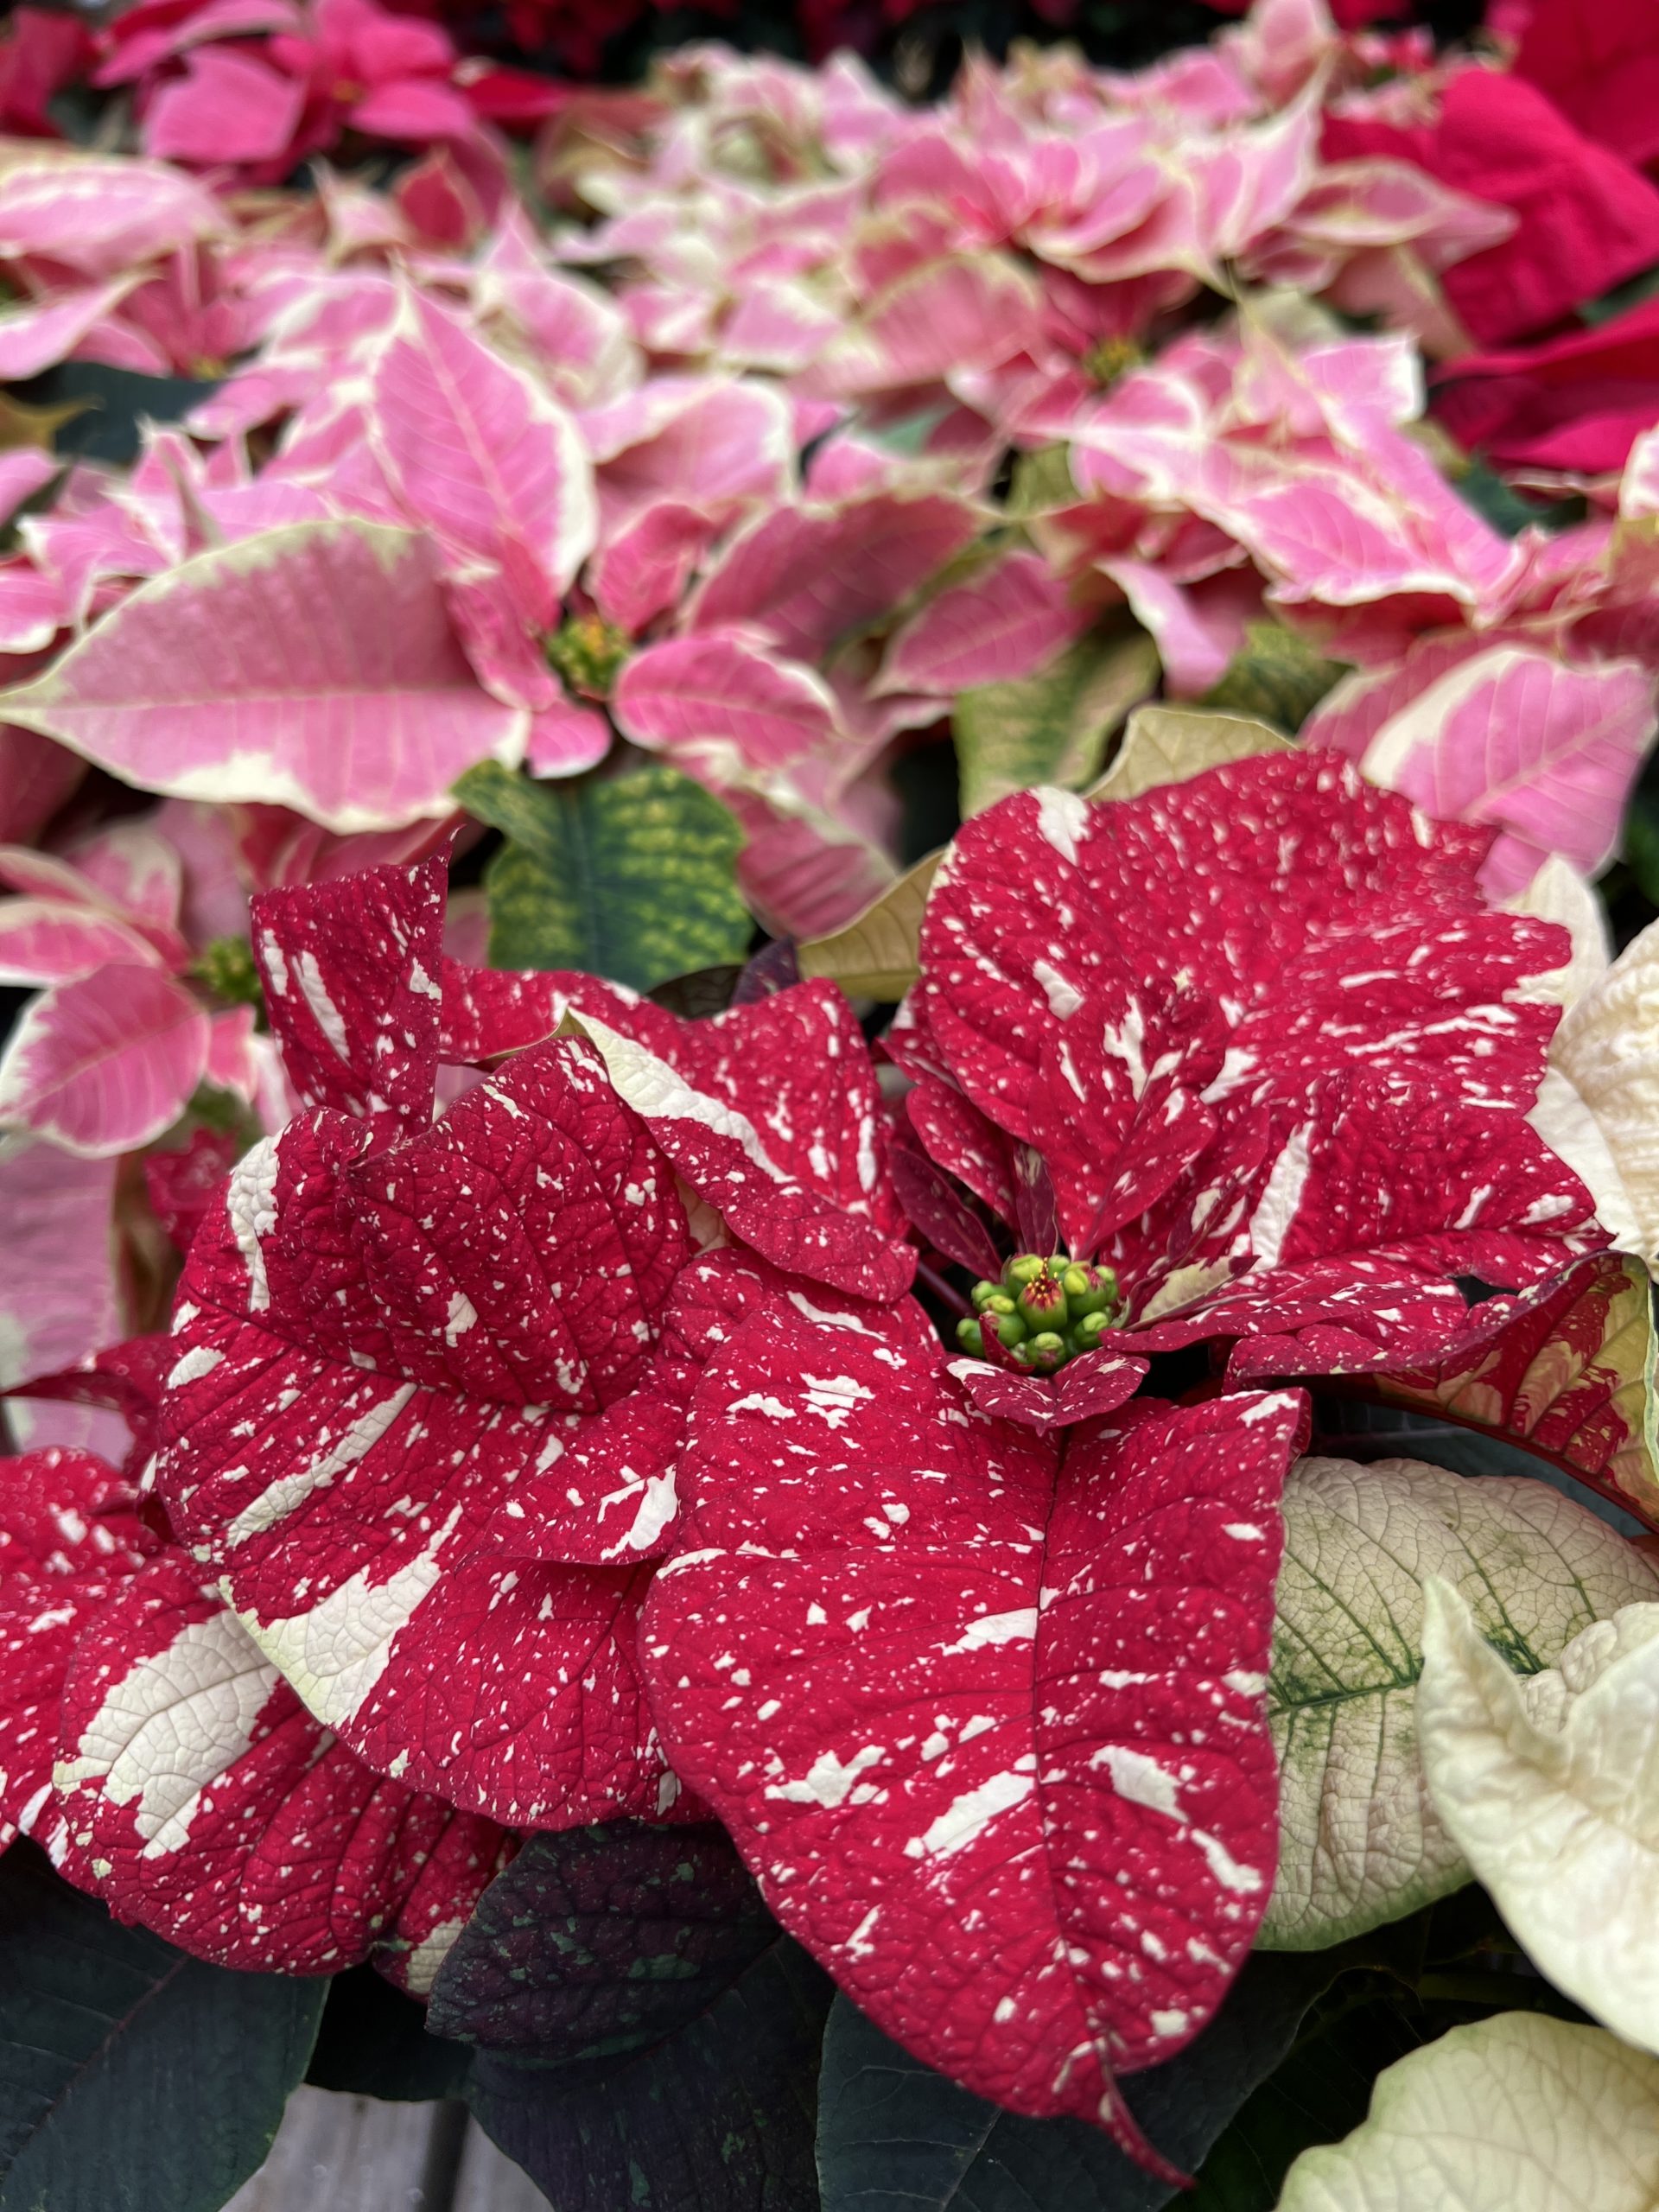 Poinsettias are the all-time favorite holiday plant, other than the Christmas tree. Available in 2- to 18-inch pots, they can be found in a range of colors, bicolors and novelties, but are nearly impossible to rebloom and are considered disposable — despite some planting them in their outdoor gardens during the summer.